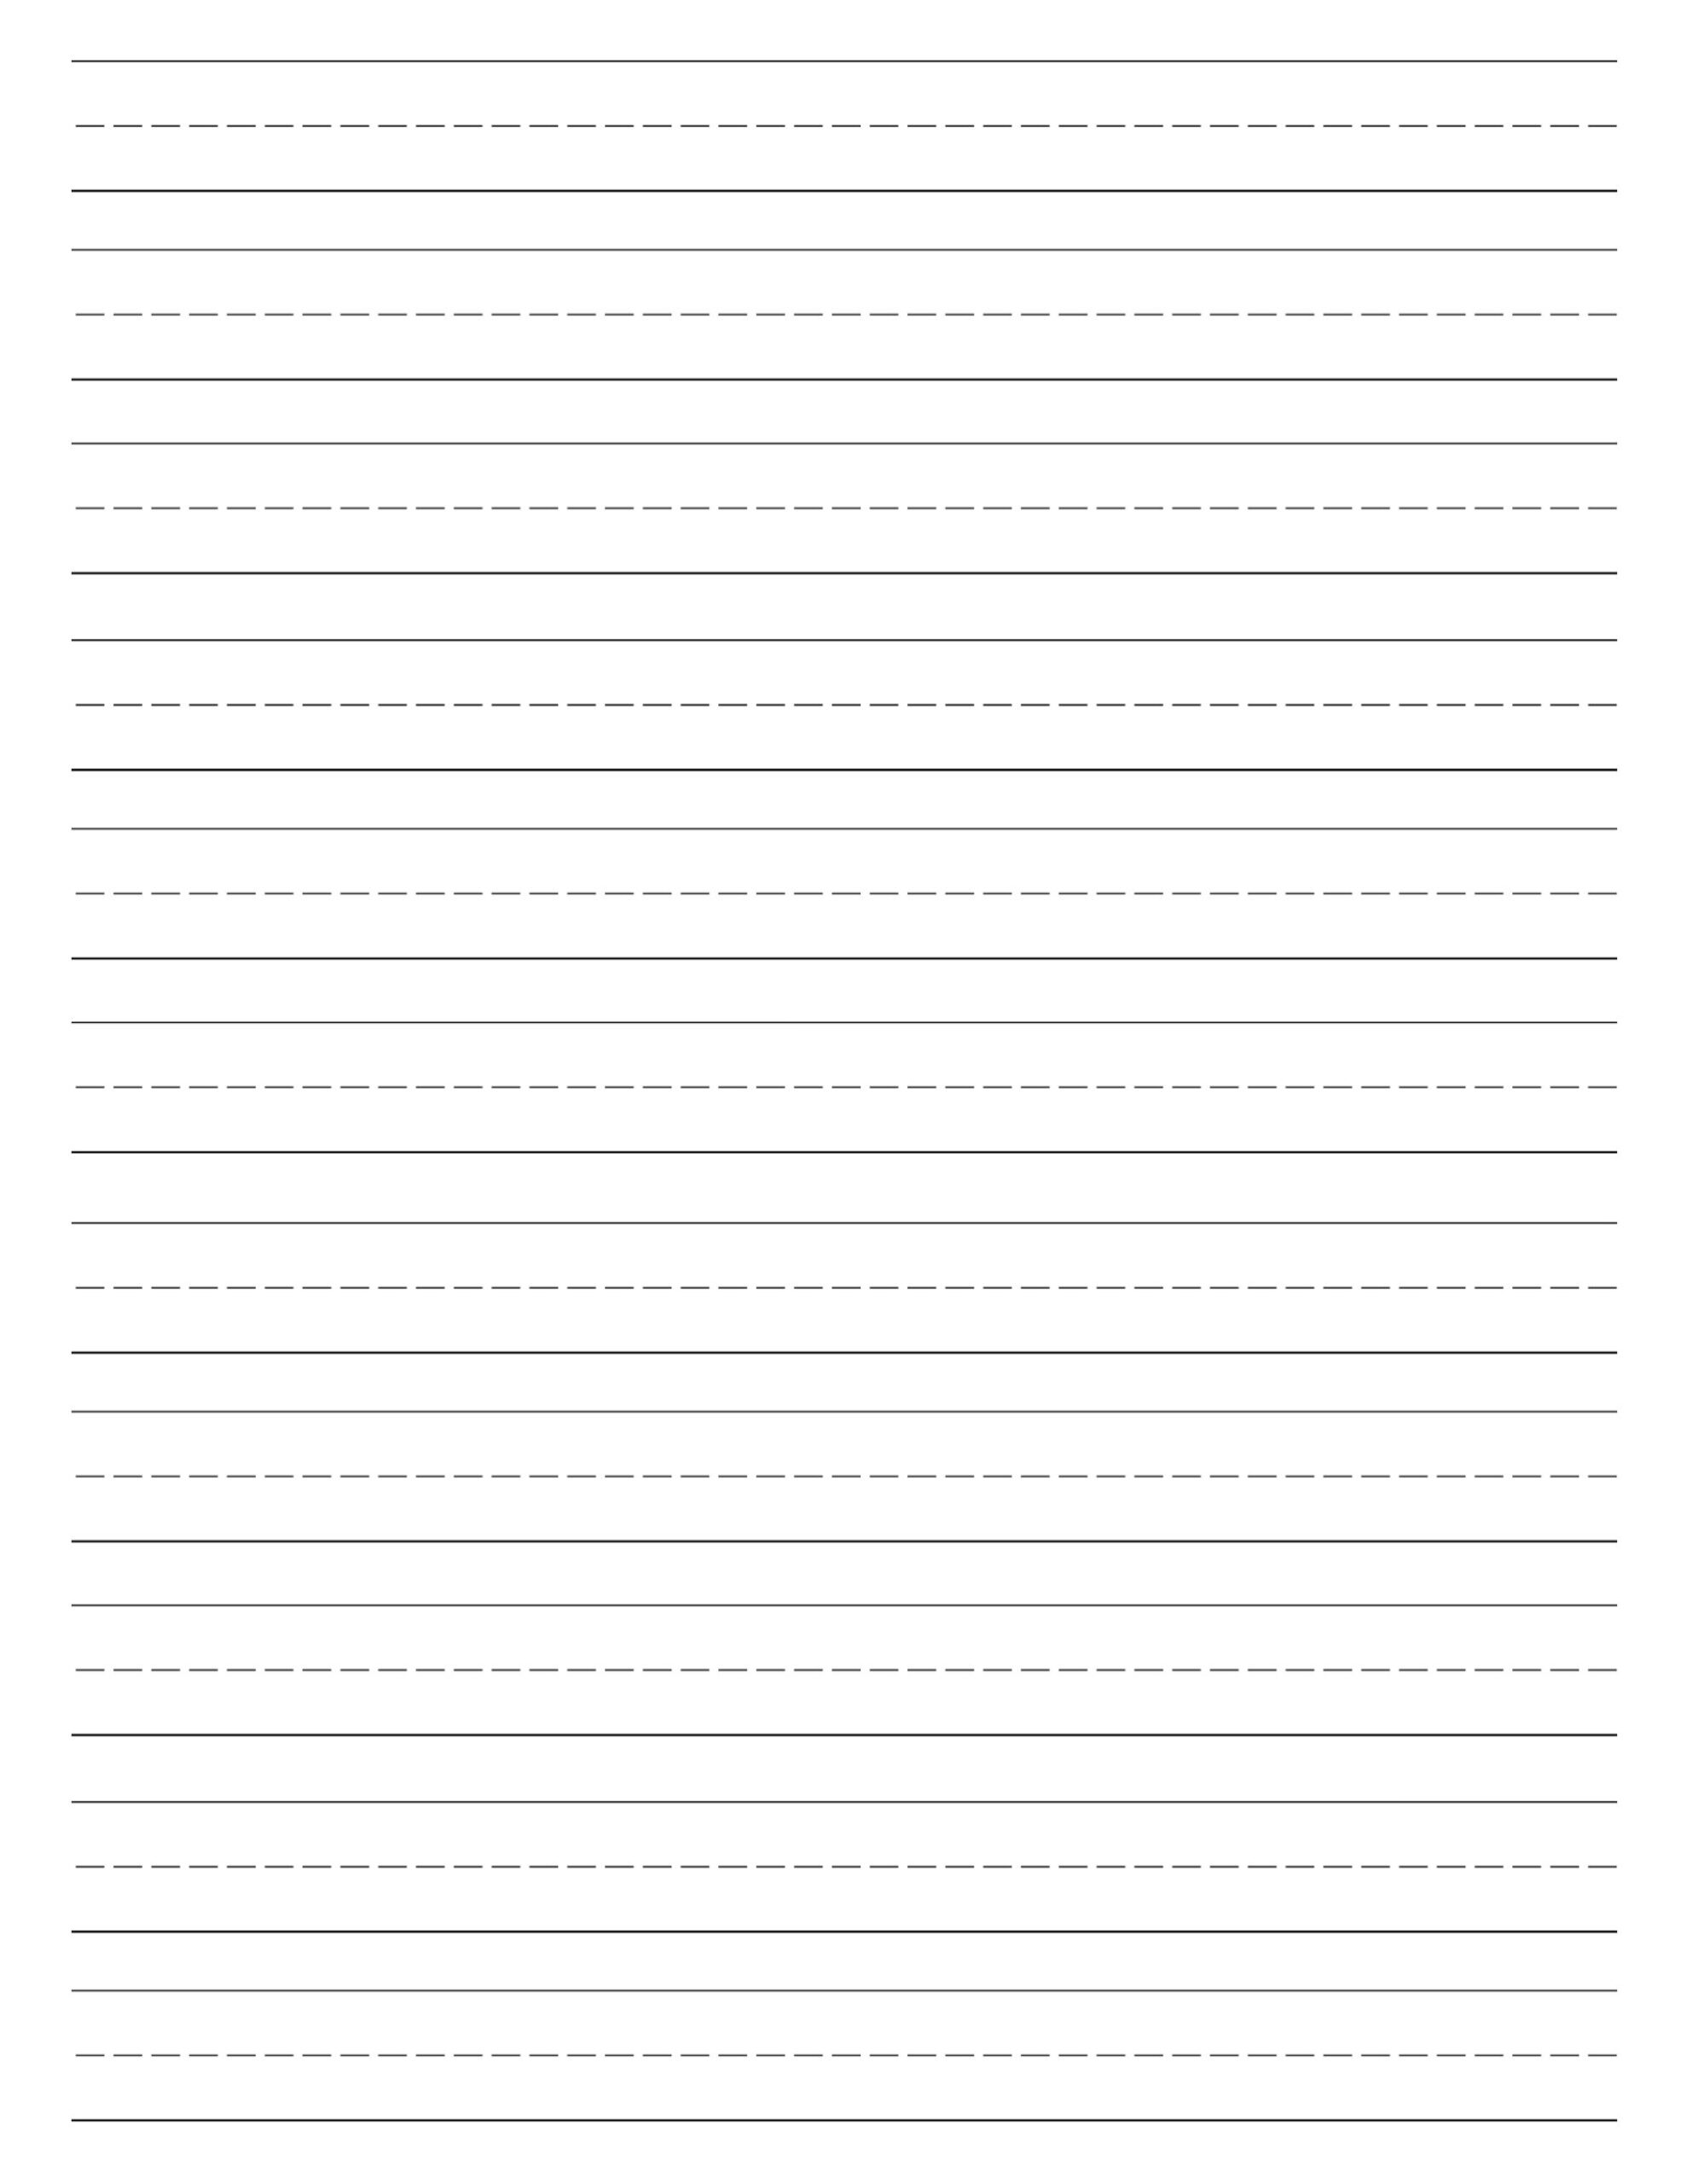 Kindergarden Lined Writing Paper Template_12876